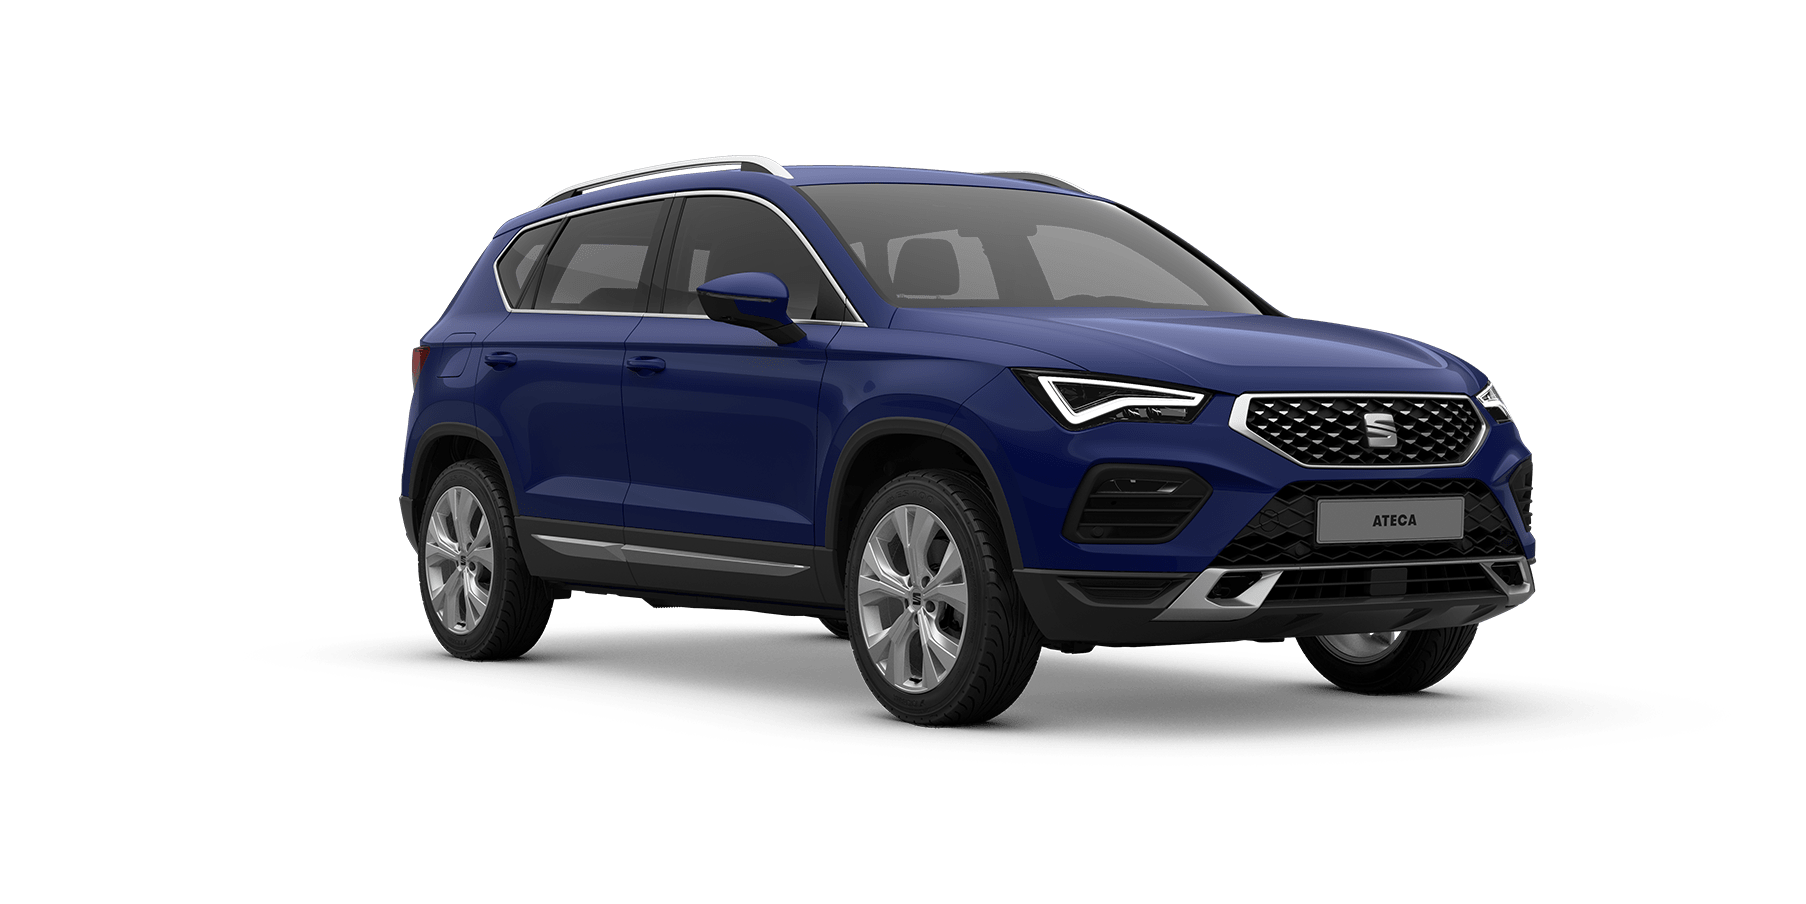 https://www.seat.mx/content/dam/countries/mx/seat-website/models/ateca/exterior-colours-2021/seat-ateca-suv-available-in-energy-blue.png